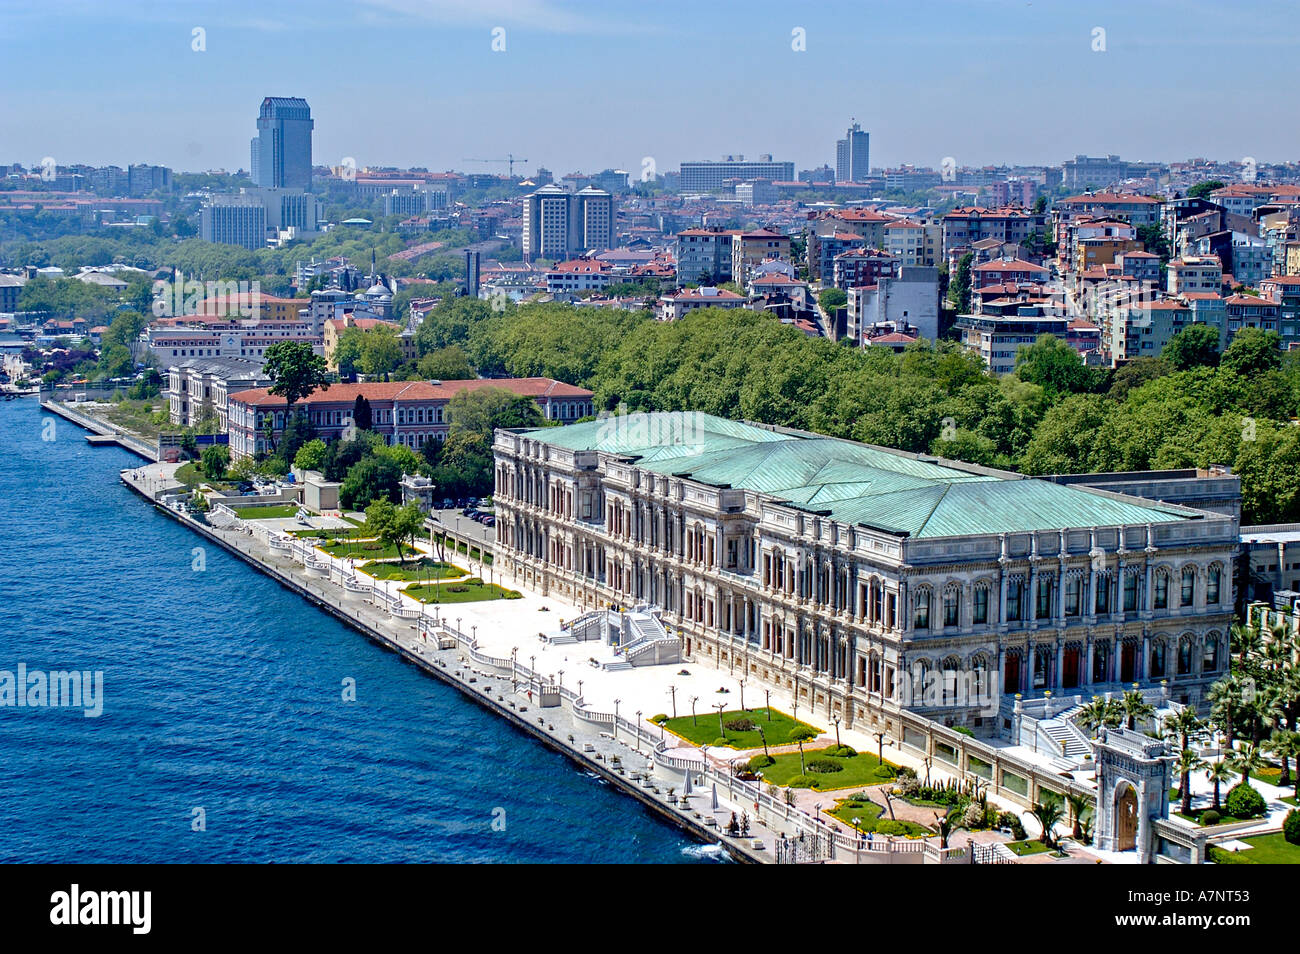 istanbul cityscape view Stock Photo